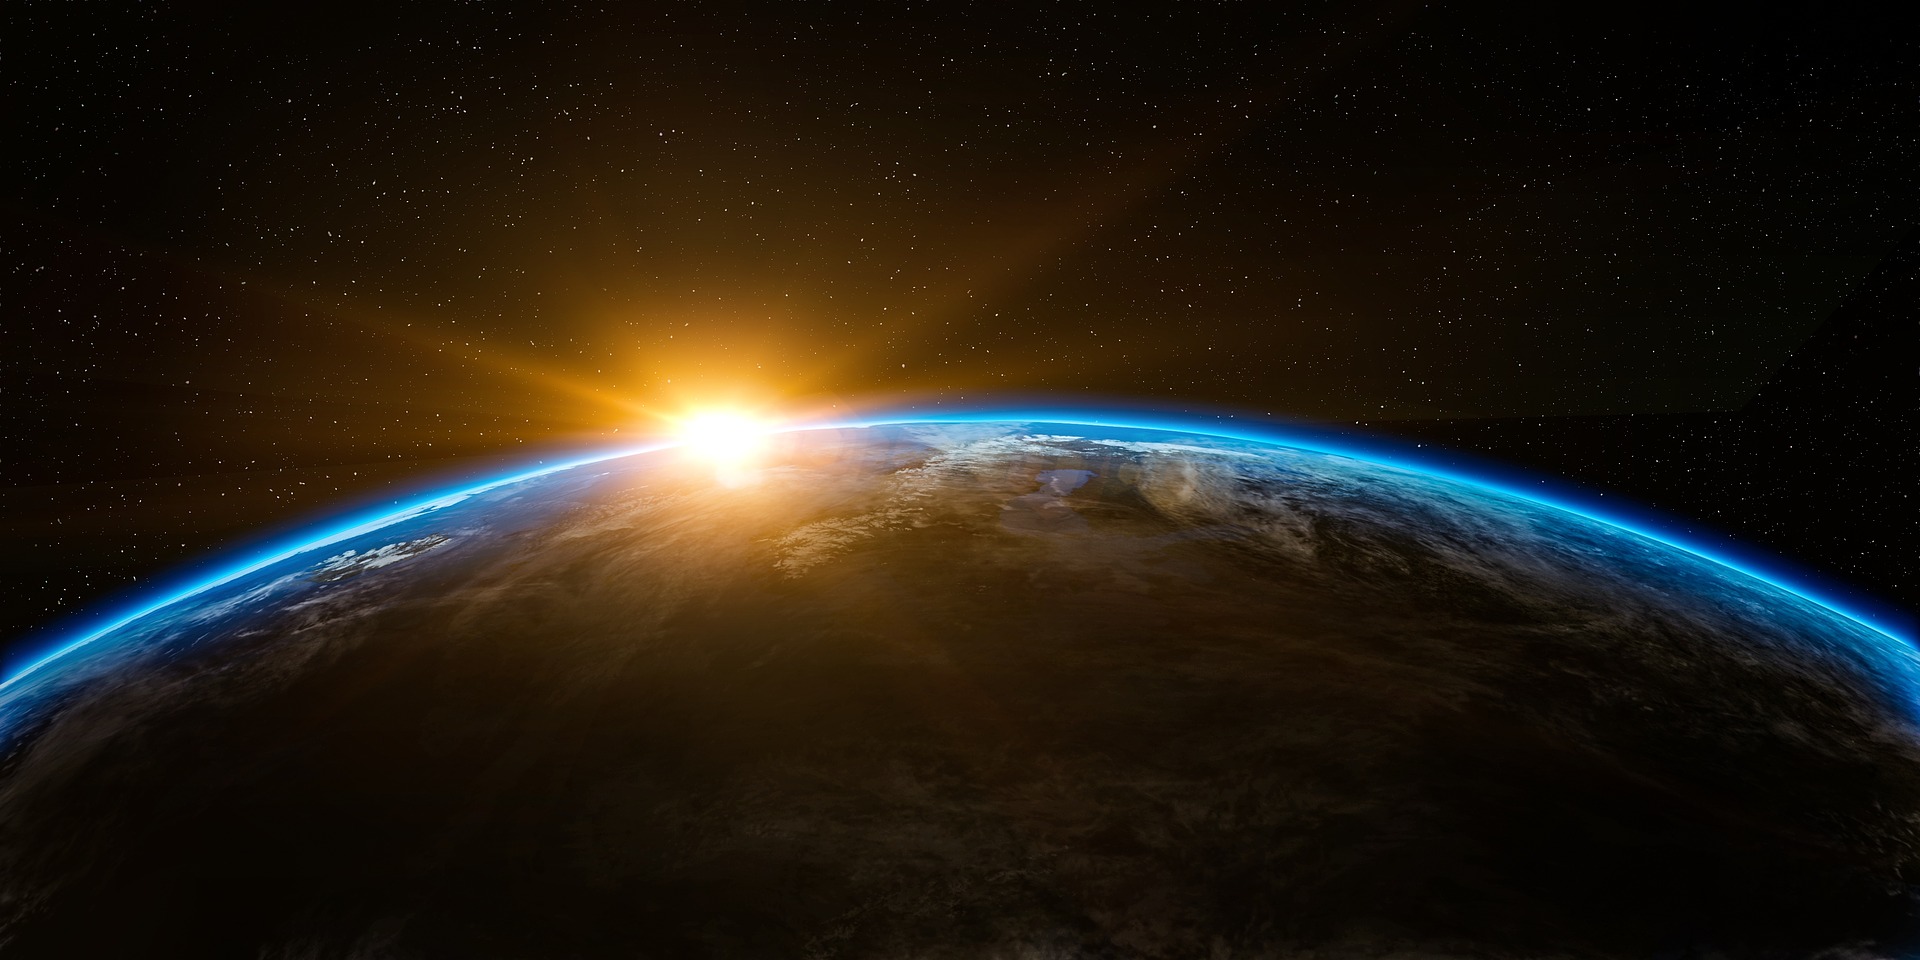 avoiding the passive voice: the earth from space with the sun coming up over its edge